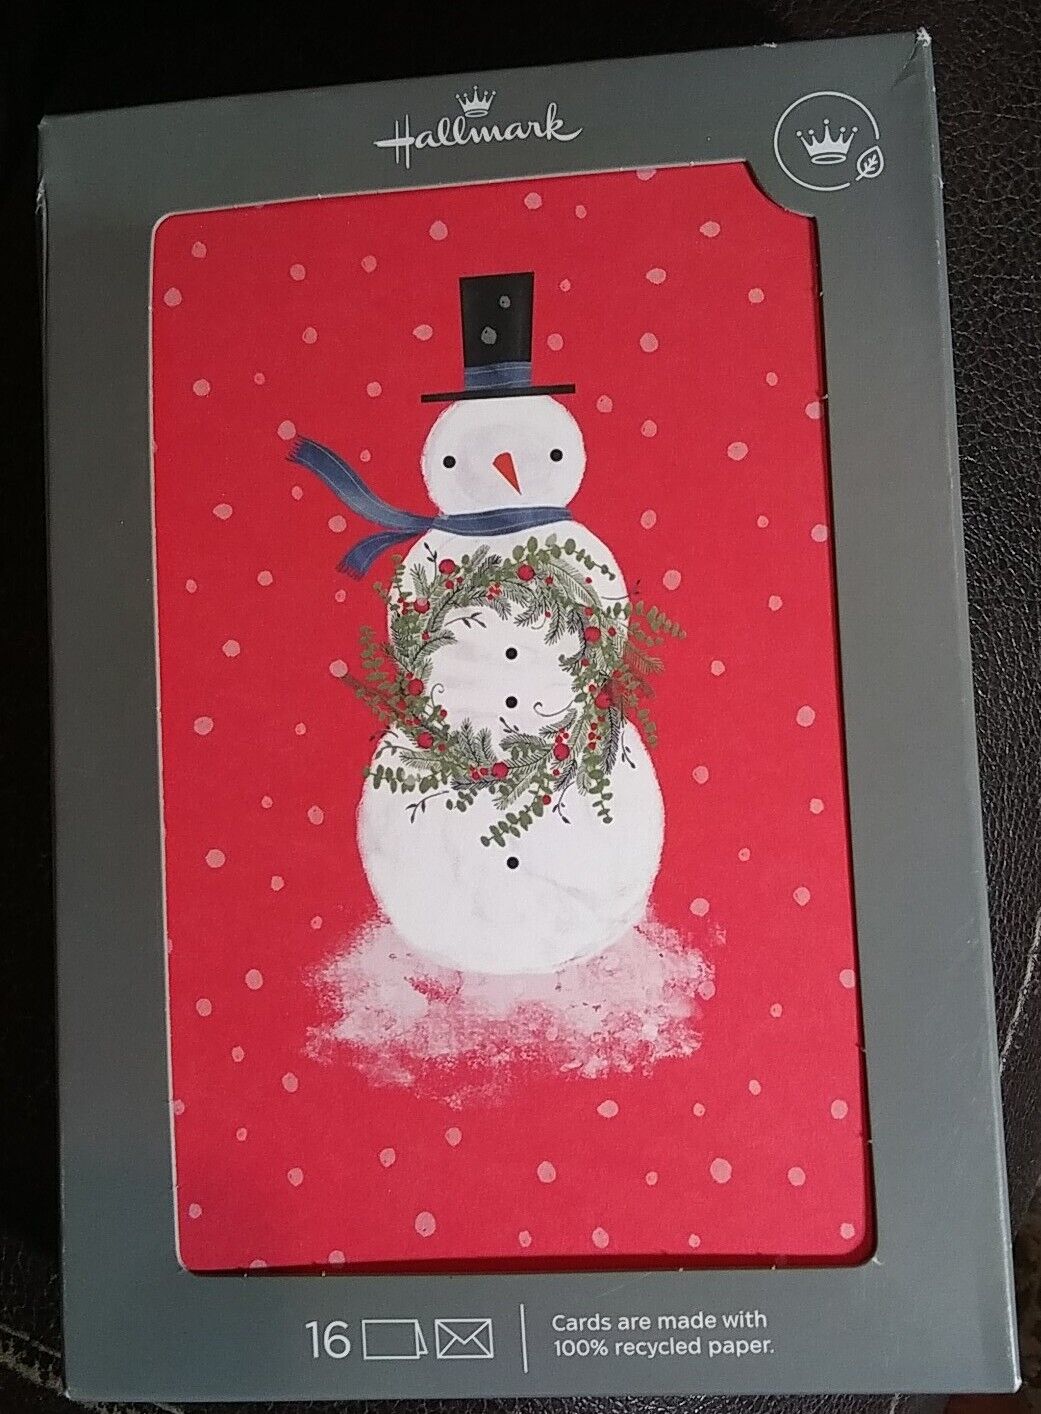 Hallmark Holiday Boxed Cards Snowman 16 Christmas Greeting Cards and Envelopes